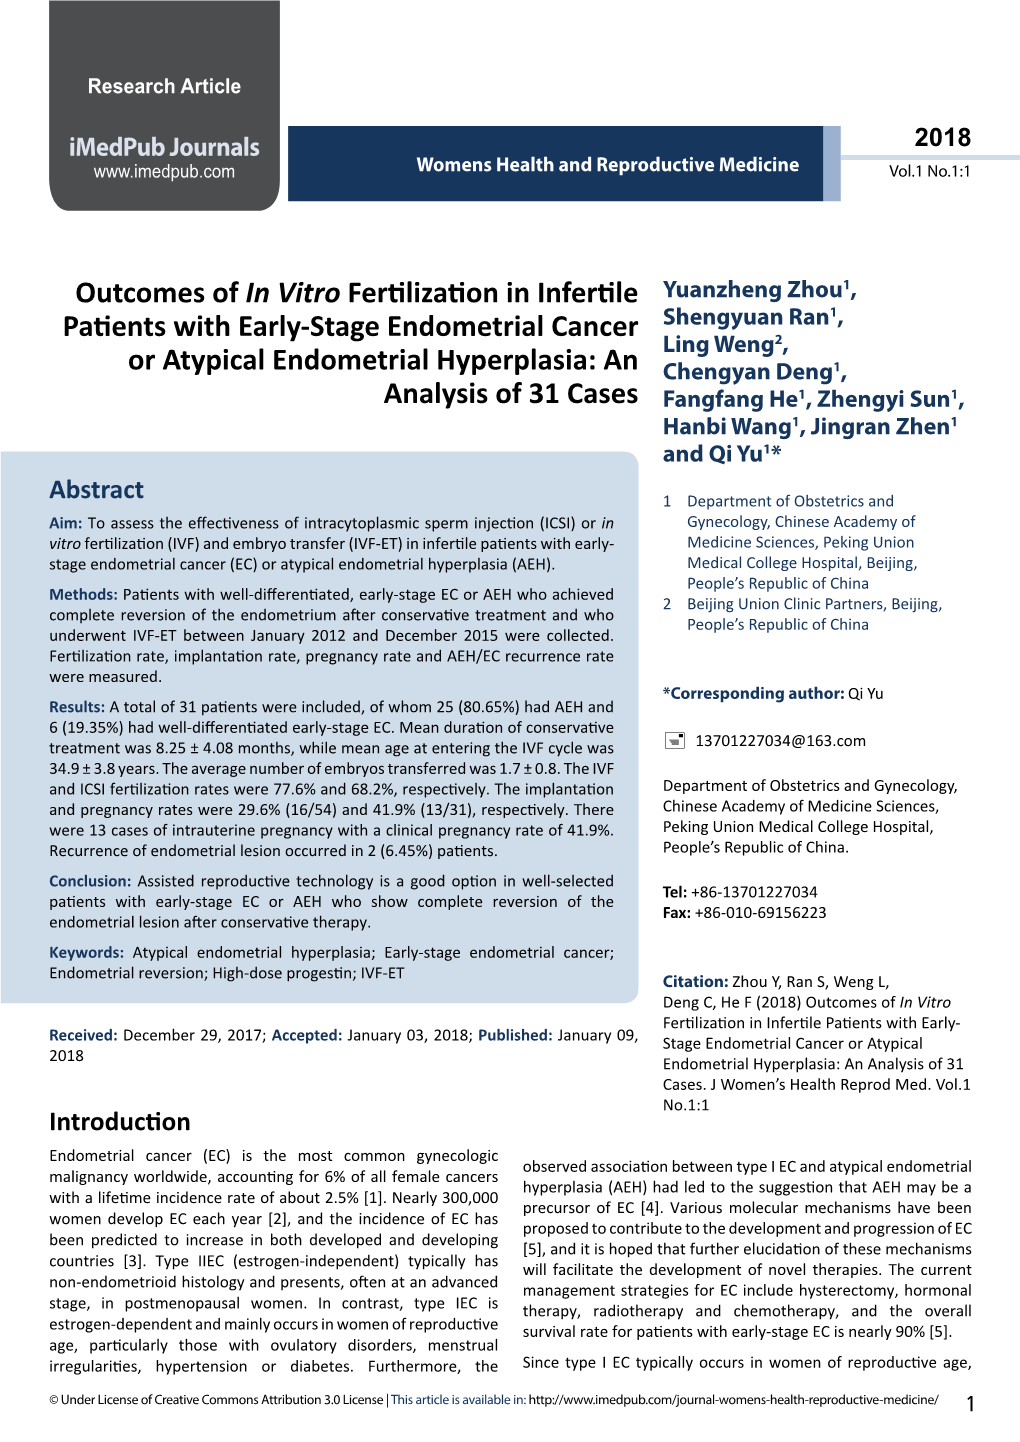 Outcomes of in Vitro Fertilization in Infertile Patients with Early-Stage Endometrial Cancer Or Atypical Endometrial Hyperplasia